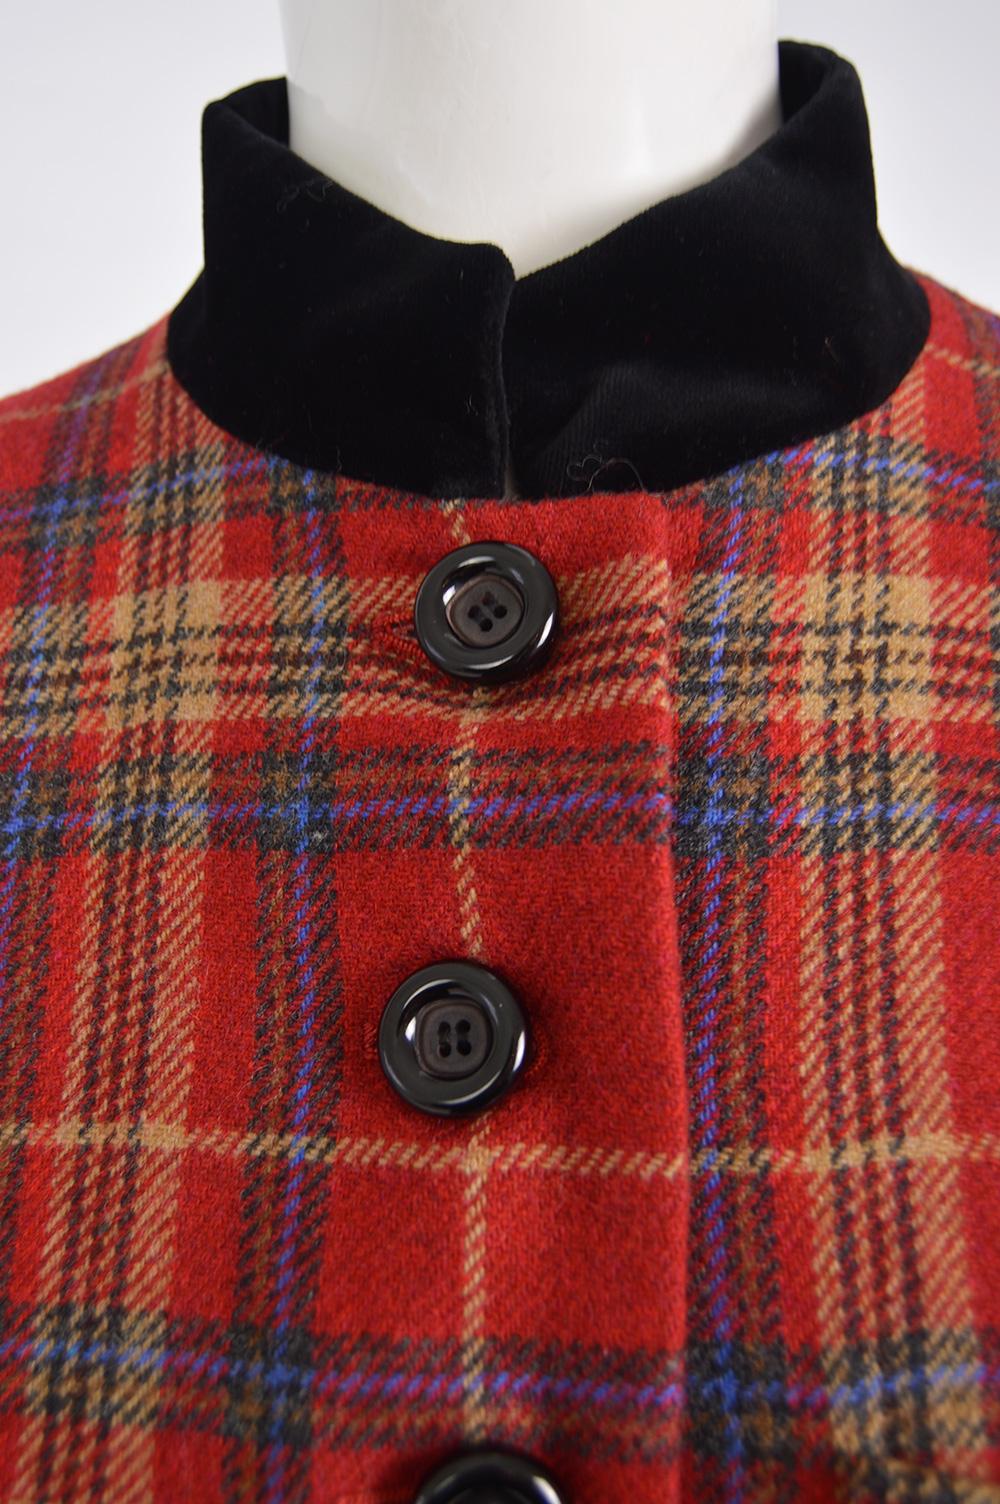 Yves Saint Laurent Rive Gauche Red Tartan Checked & Black Velvet Blazer, 1980s In Excellent Condition For Sale In Doncaster, South Yorkshire